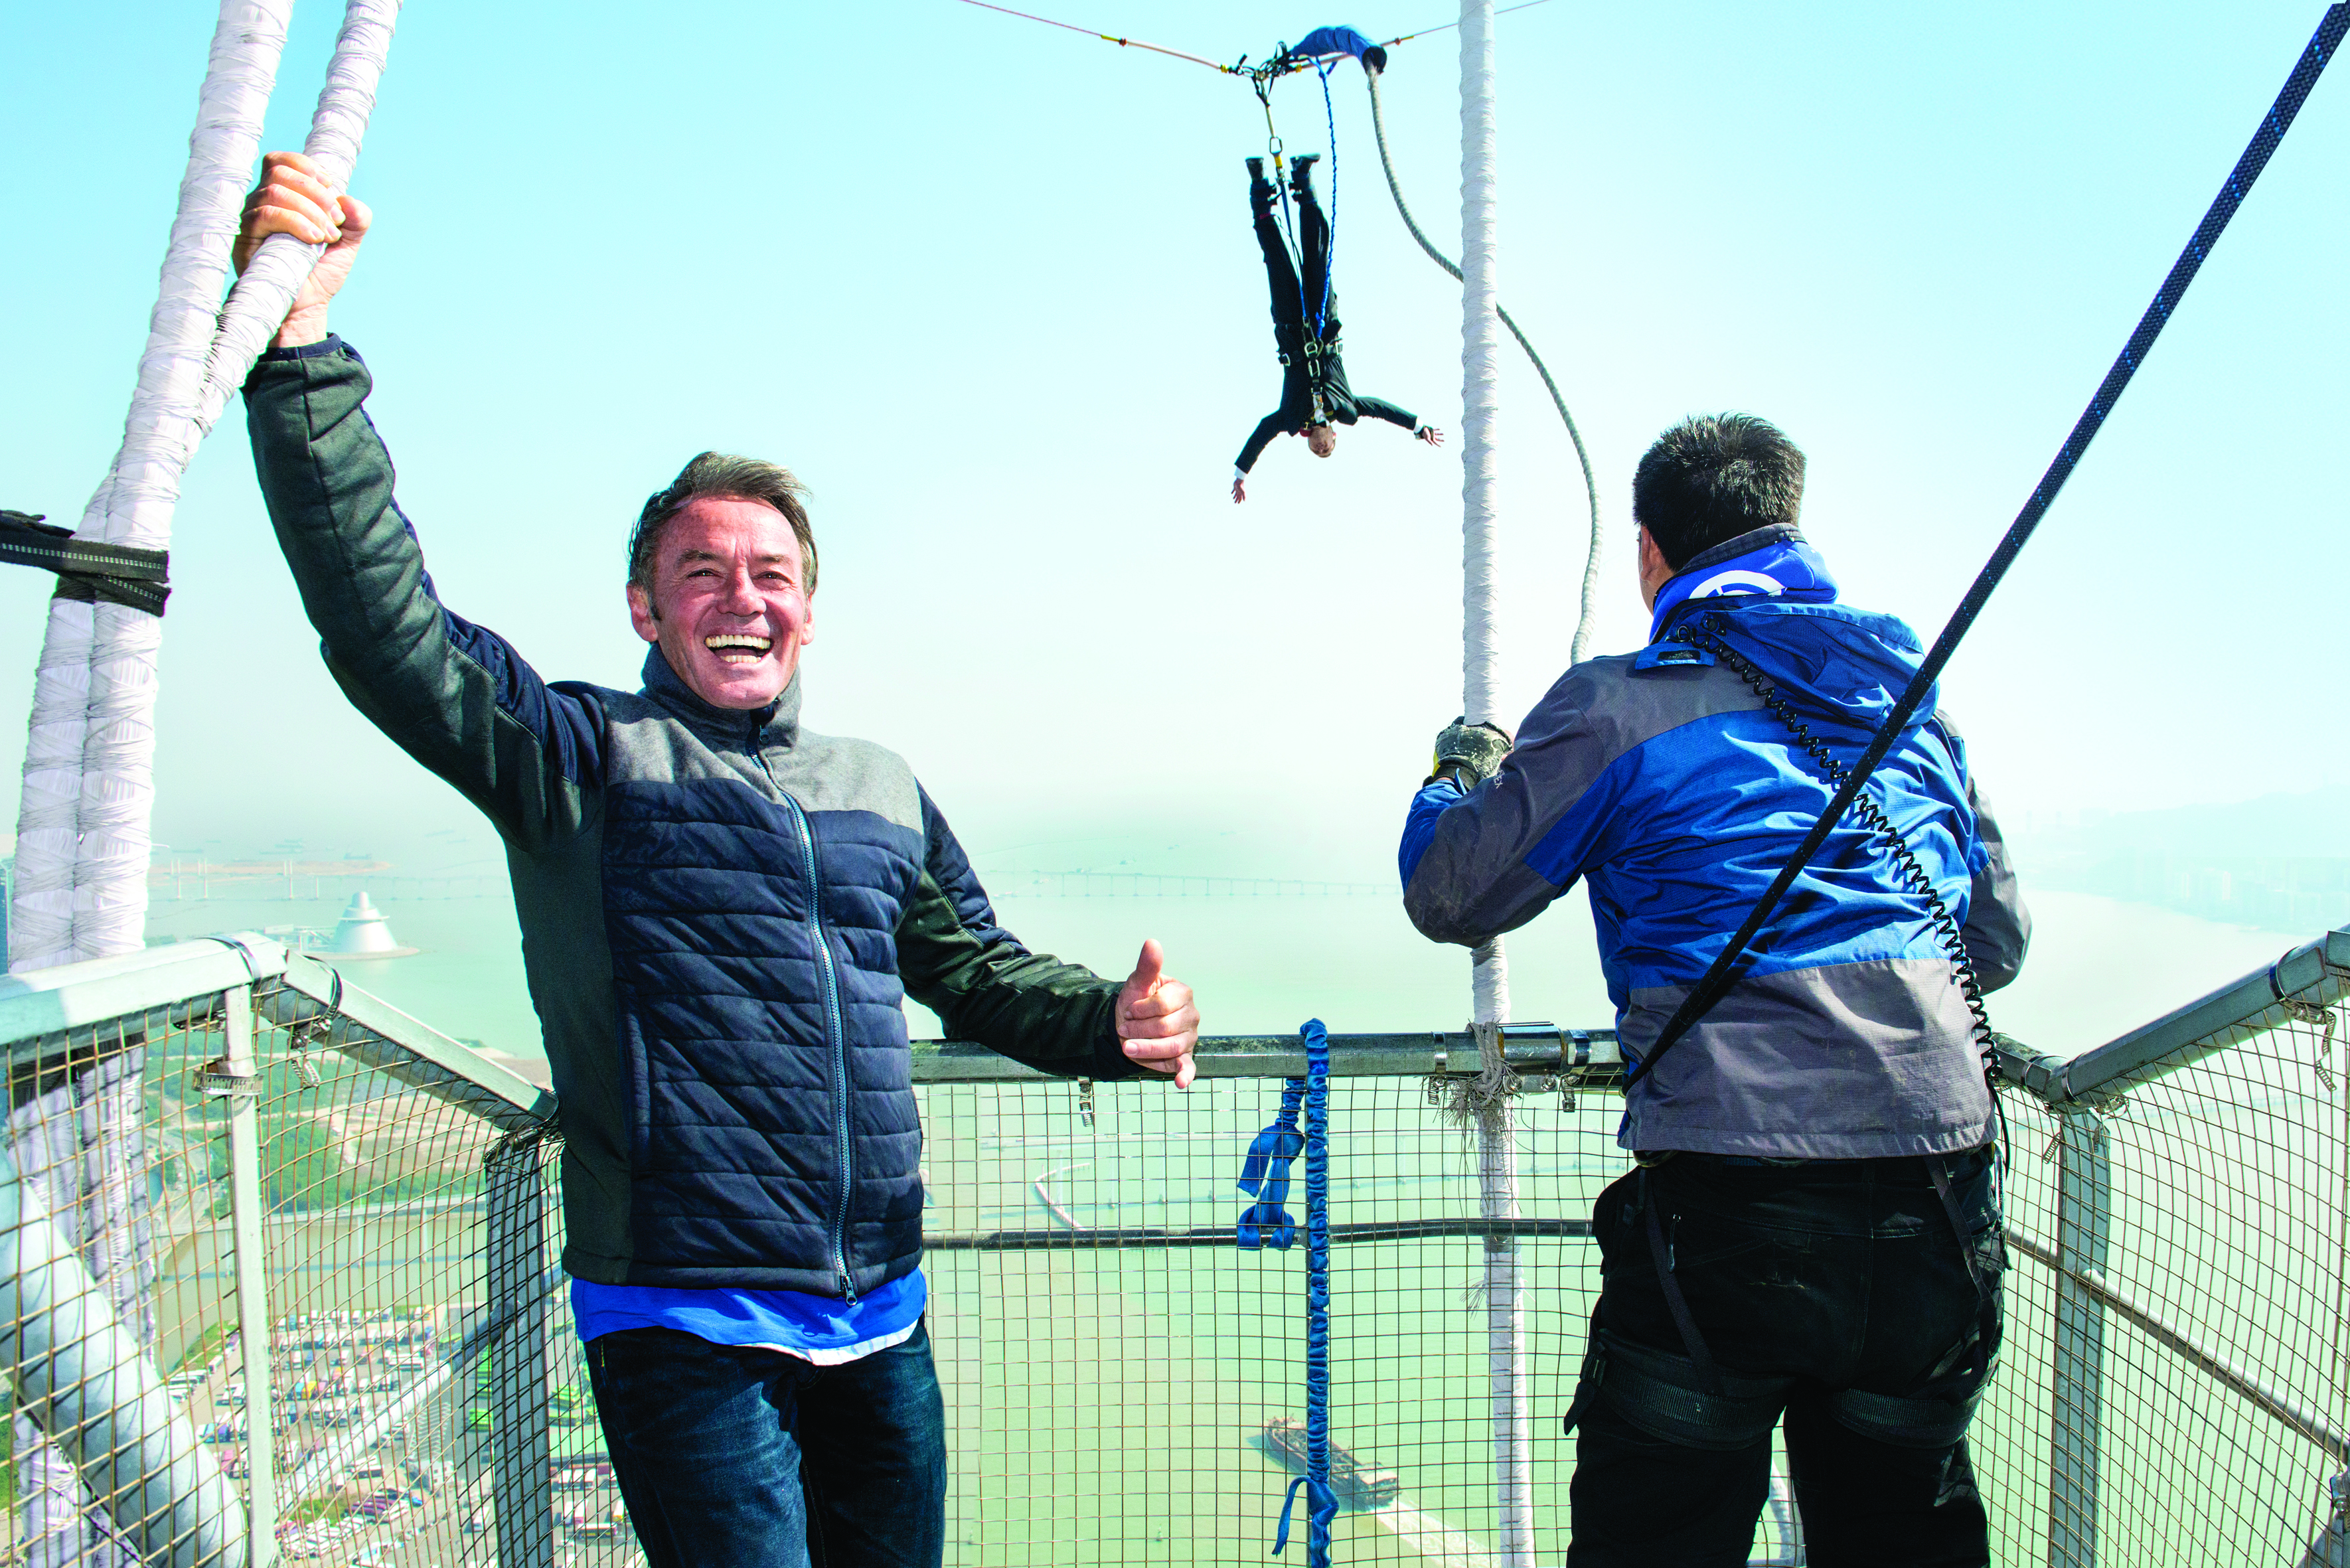 A.J. Hackett opened the world's highest commercial bungy jump at Macau Tower in 2006. 